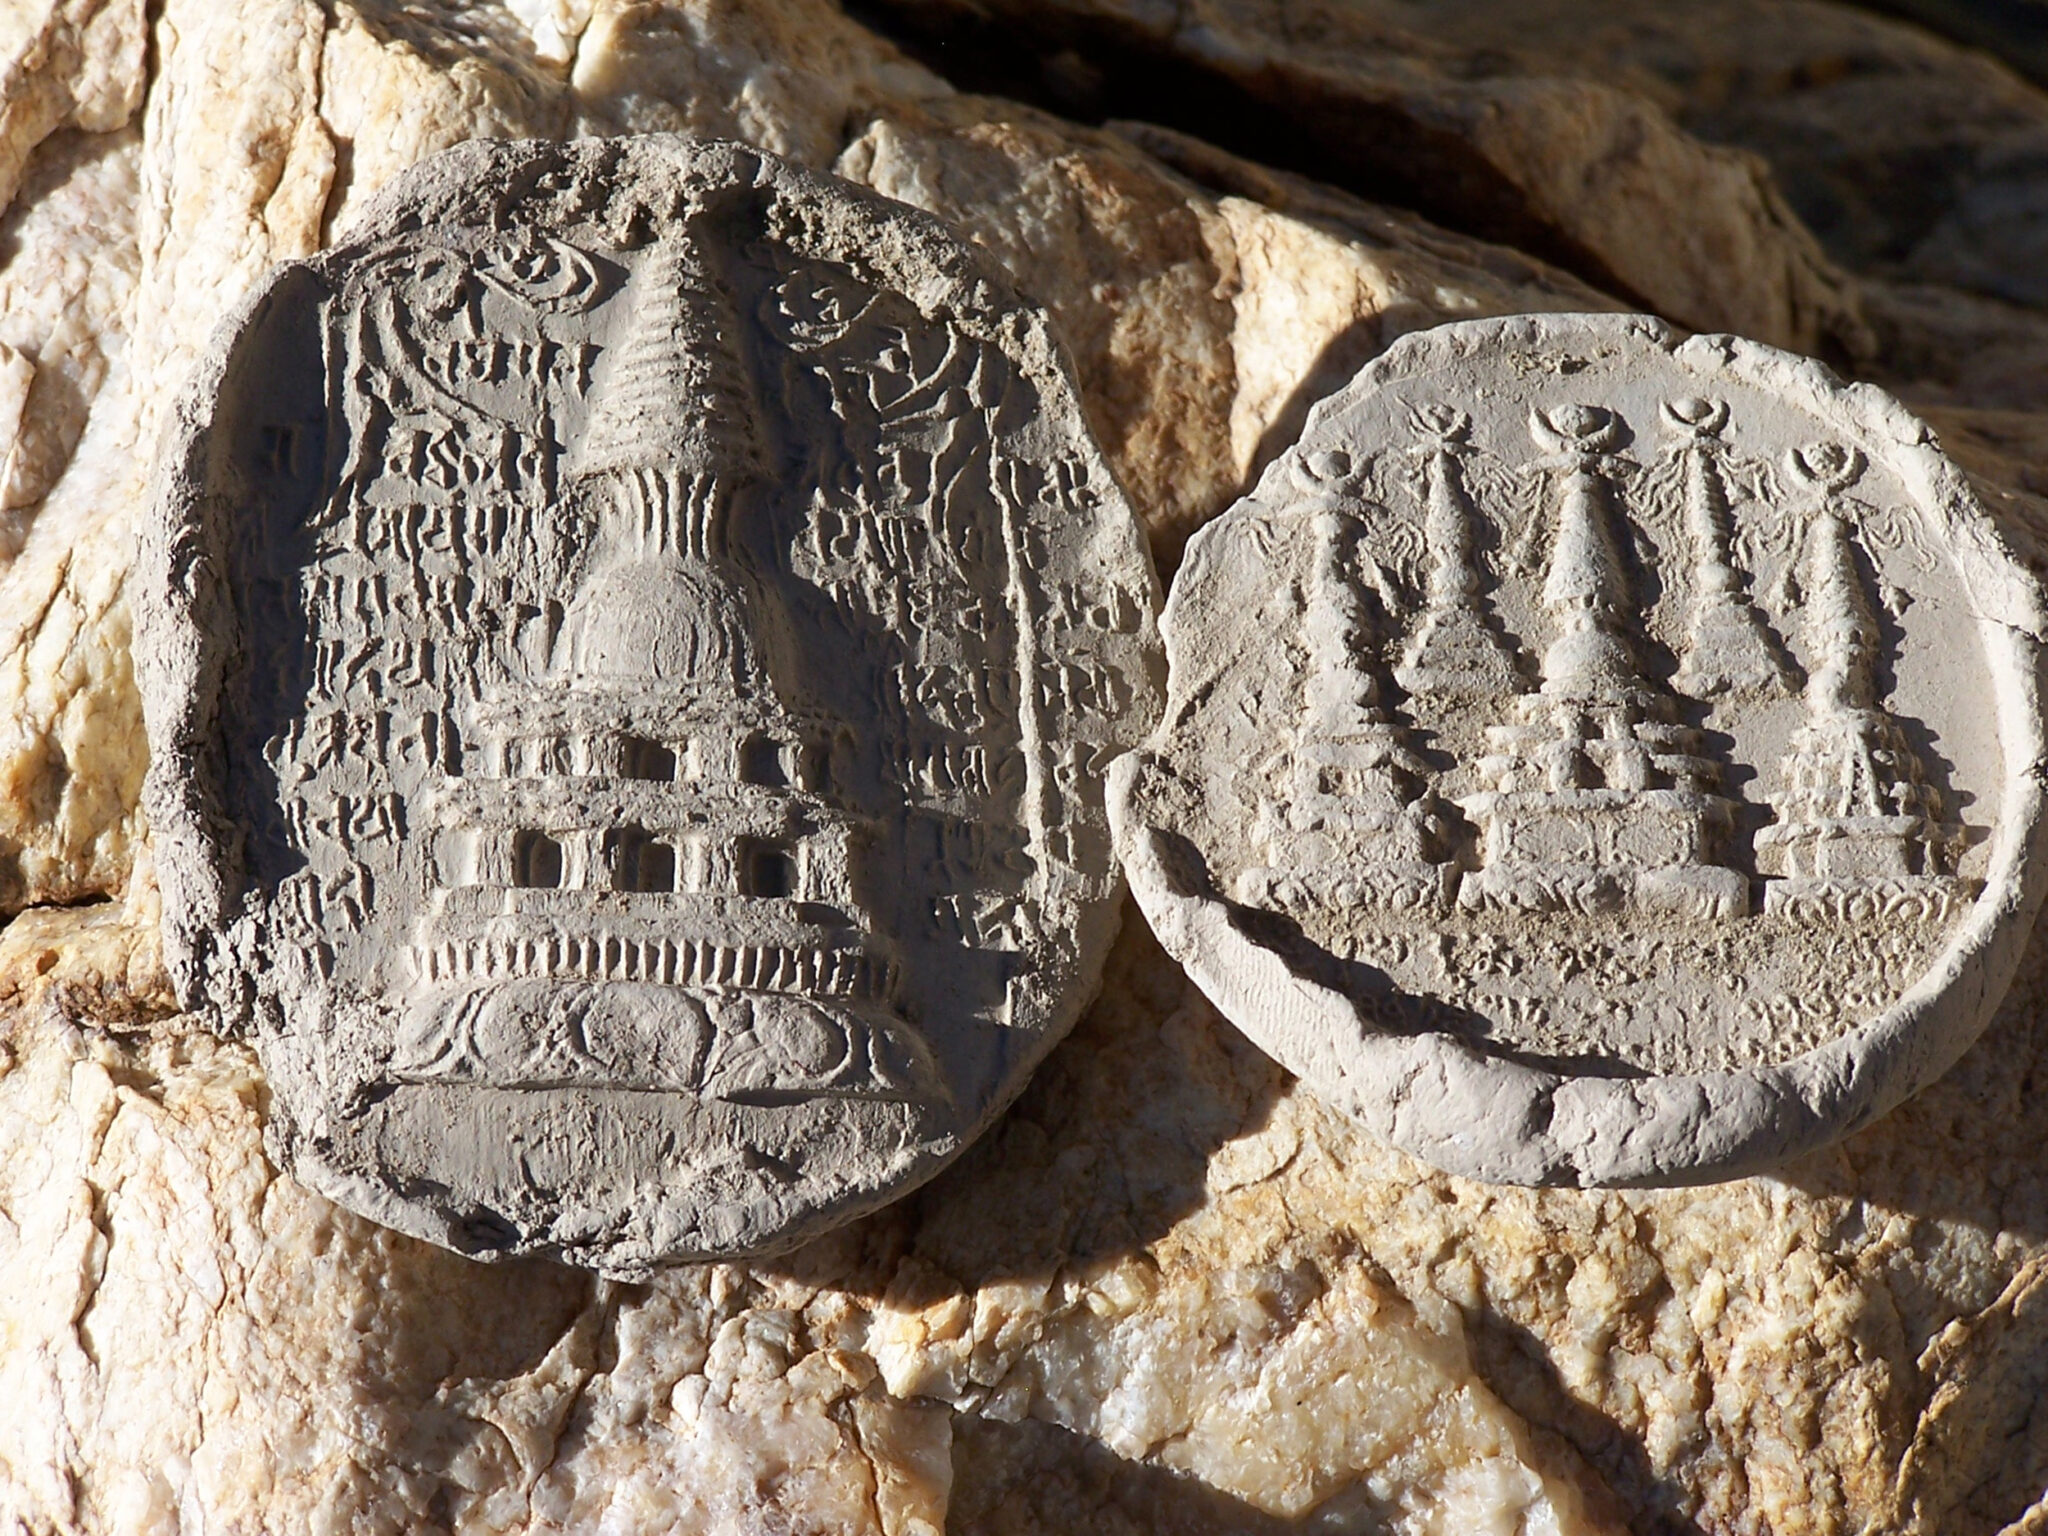 Two stamped clay discs arranged on beige rock: at left, one stupa amid text; at right, five stupas in two rows